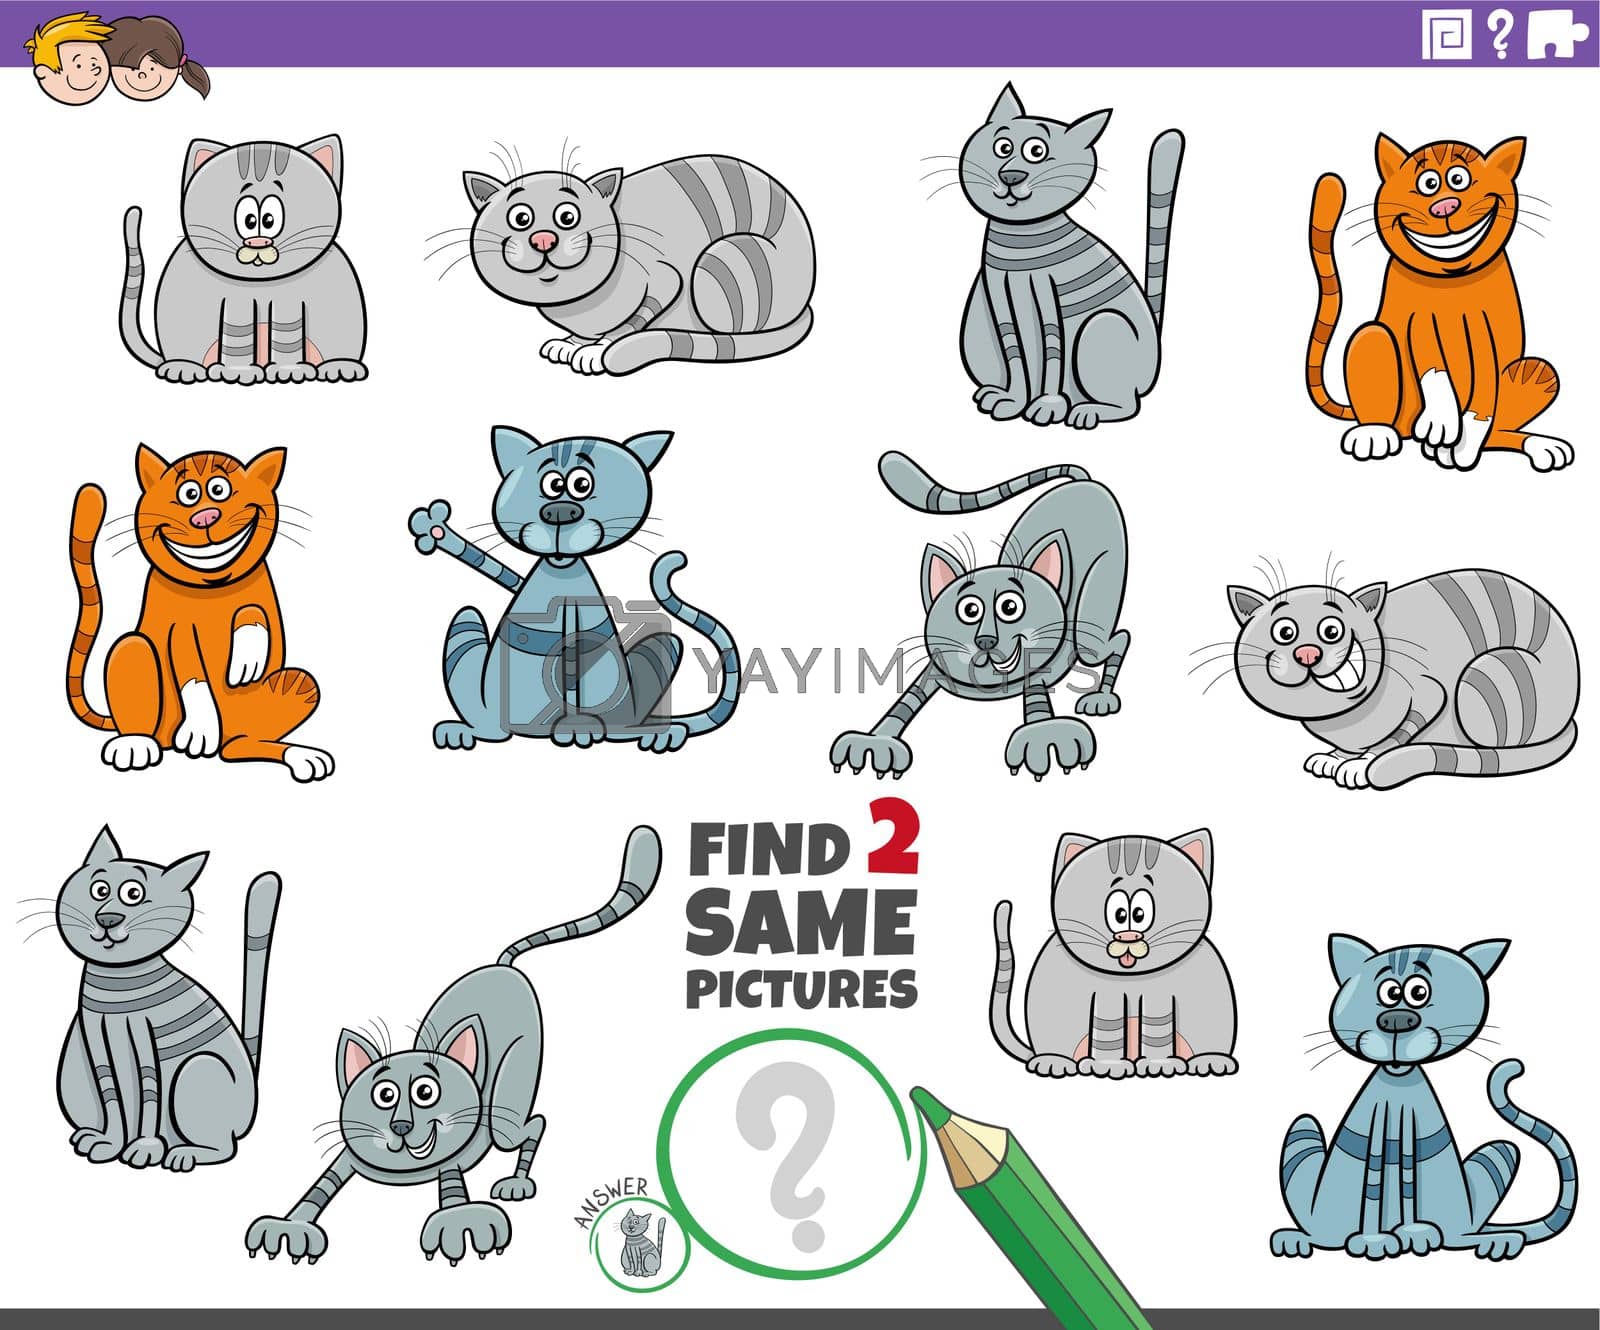 Royalty free image of find two same cartoon cat characters educational task by izakowski